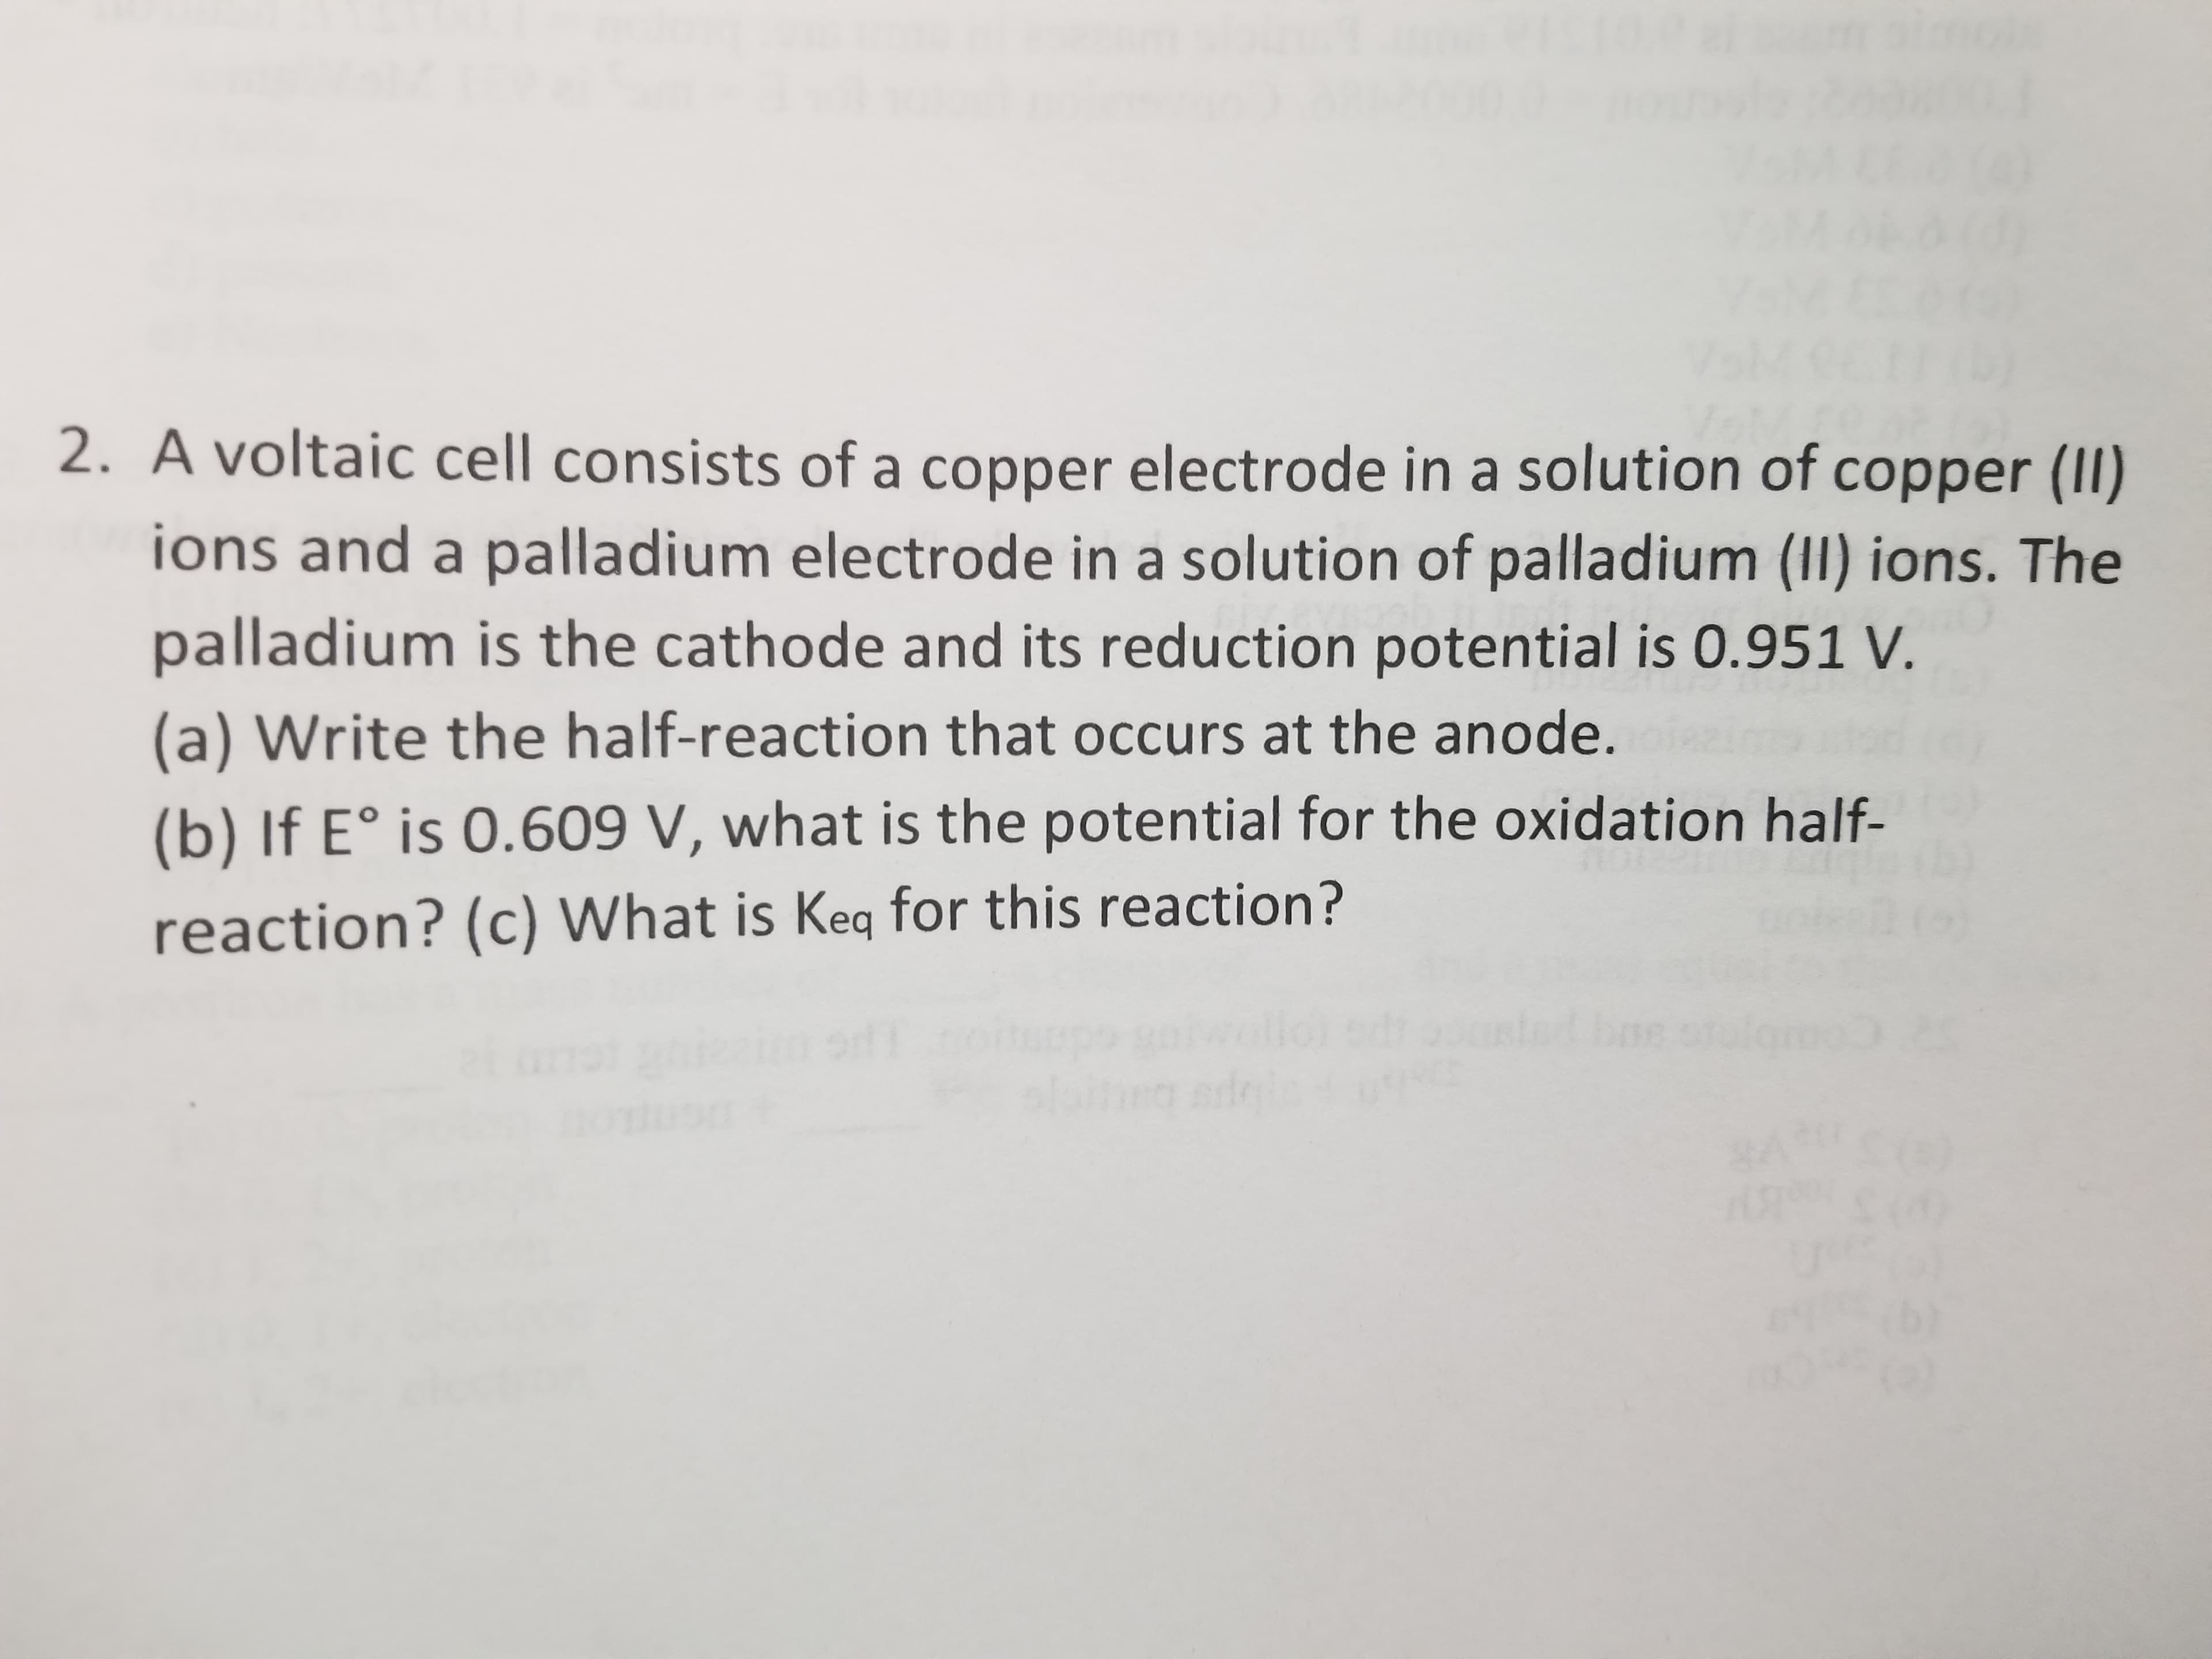 A voltaic cell consists of a copper electrode in a solution of copper (II)
ions and a palladium electrode in a solution of palladium (II) ions. The
palladium is the cathode and its reduction potential is 0.951 V.
(a) Write the half-reaction that occurs at the anode.
(b) If E° is 0.609 V, what is the potential for the oxidation half-
reaction? (c) What is Keq for this reaction?
